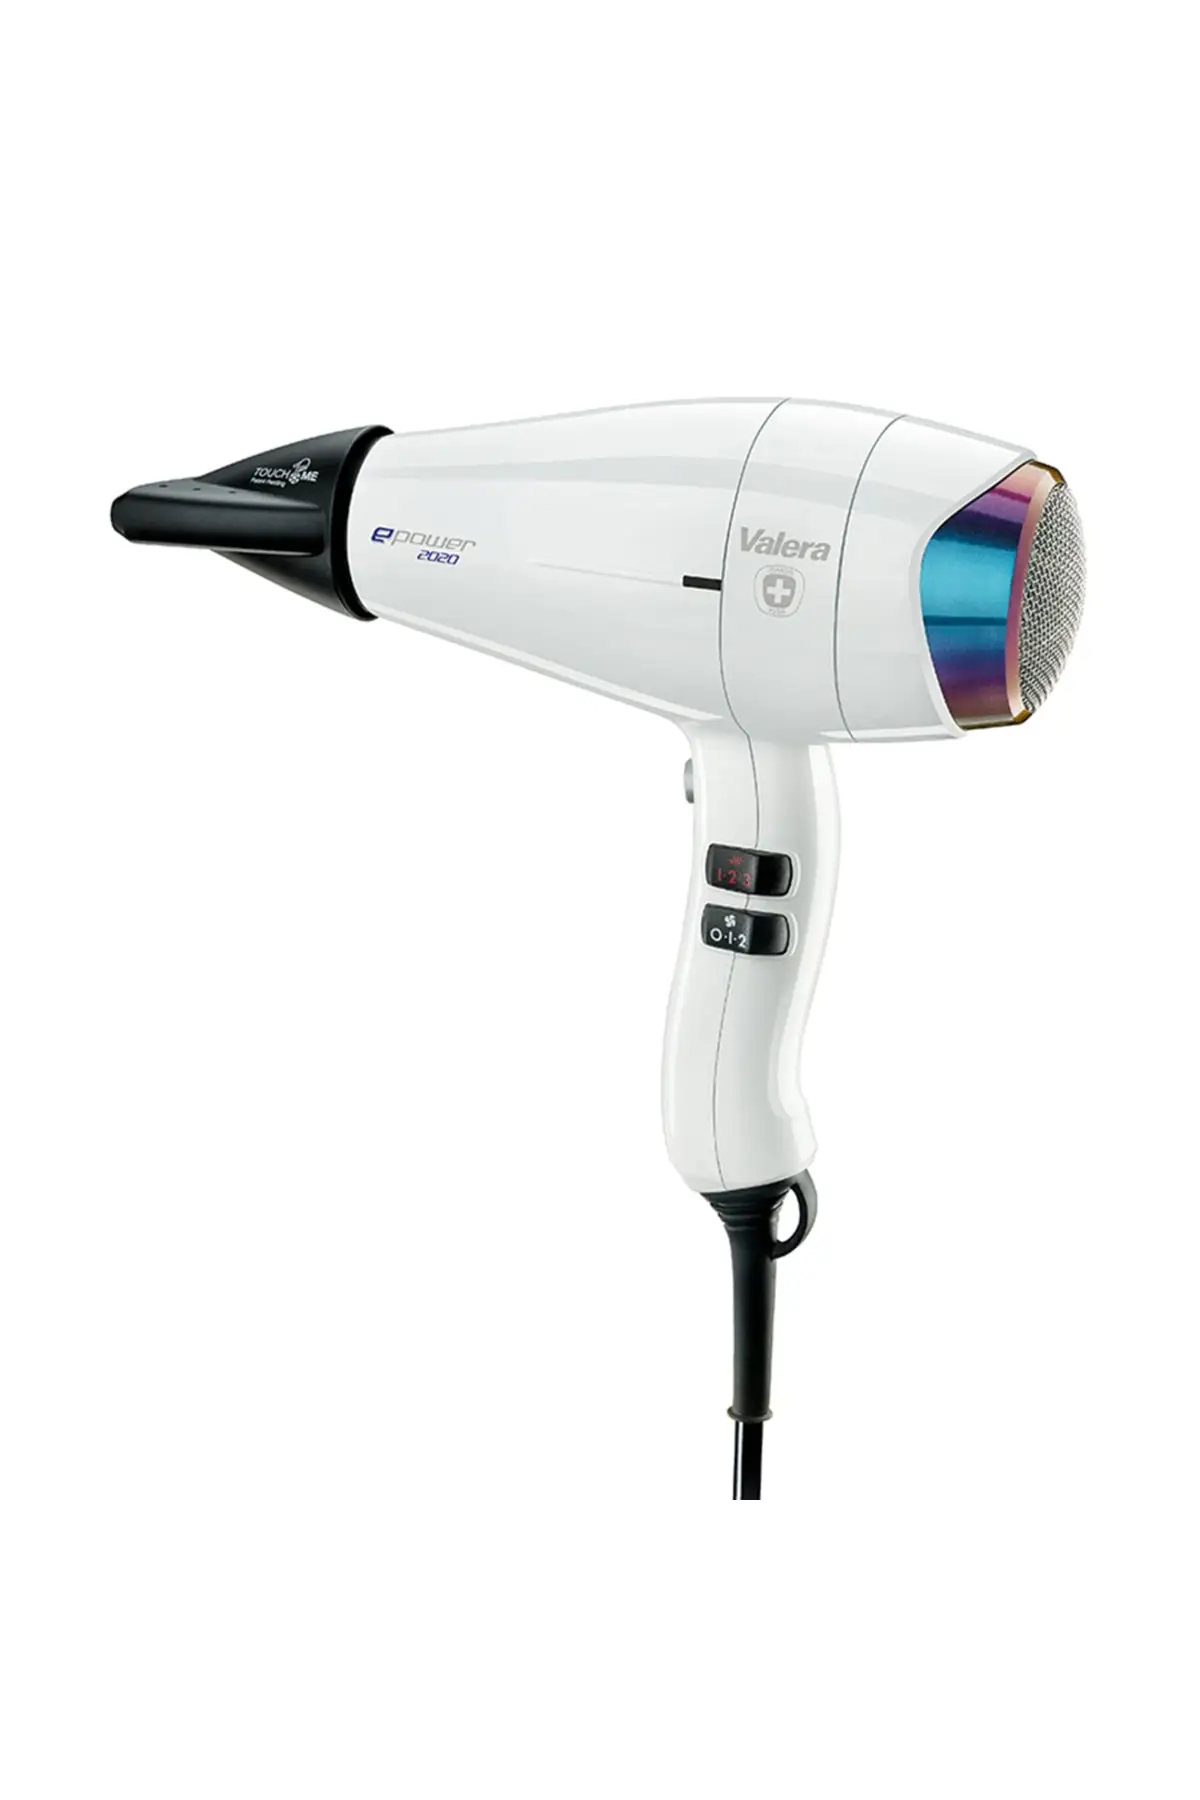 

Epower Ep2020 Eq Rc D removable metallic diffuser professional hair dryer